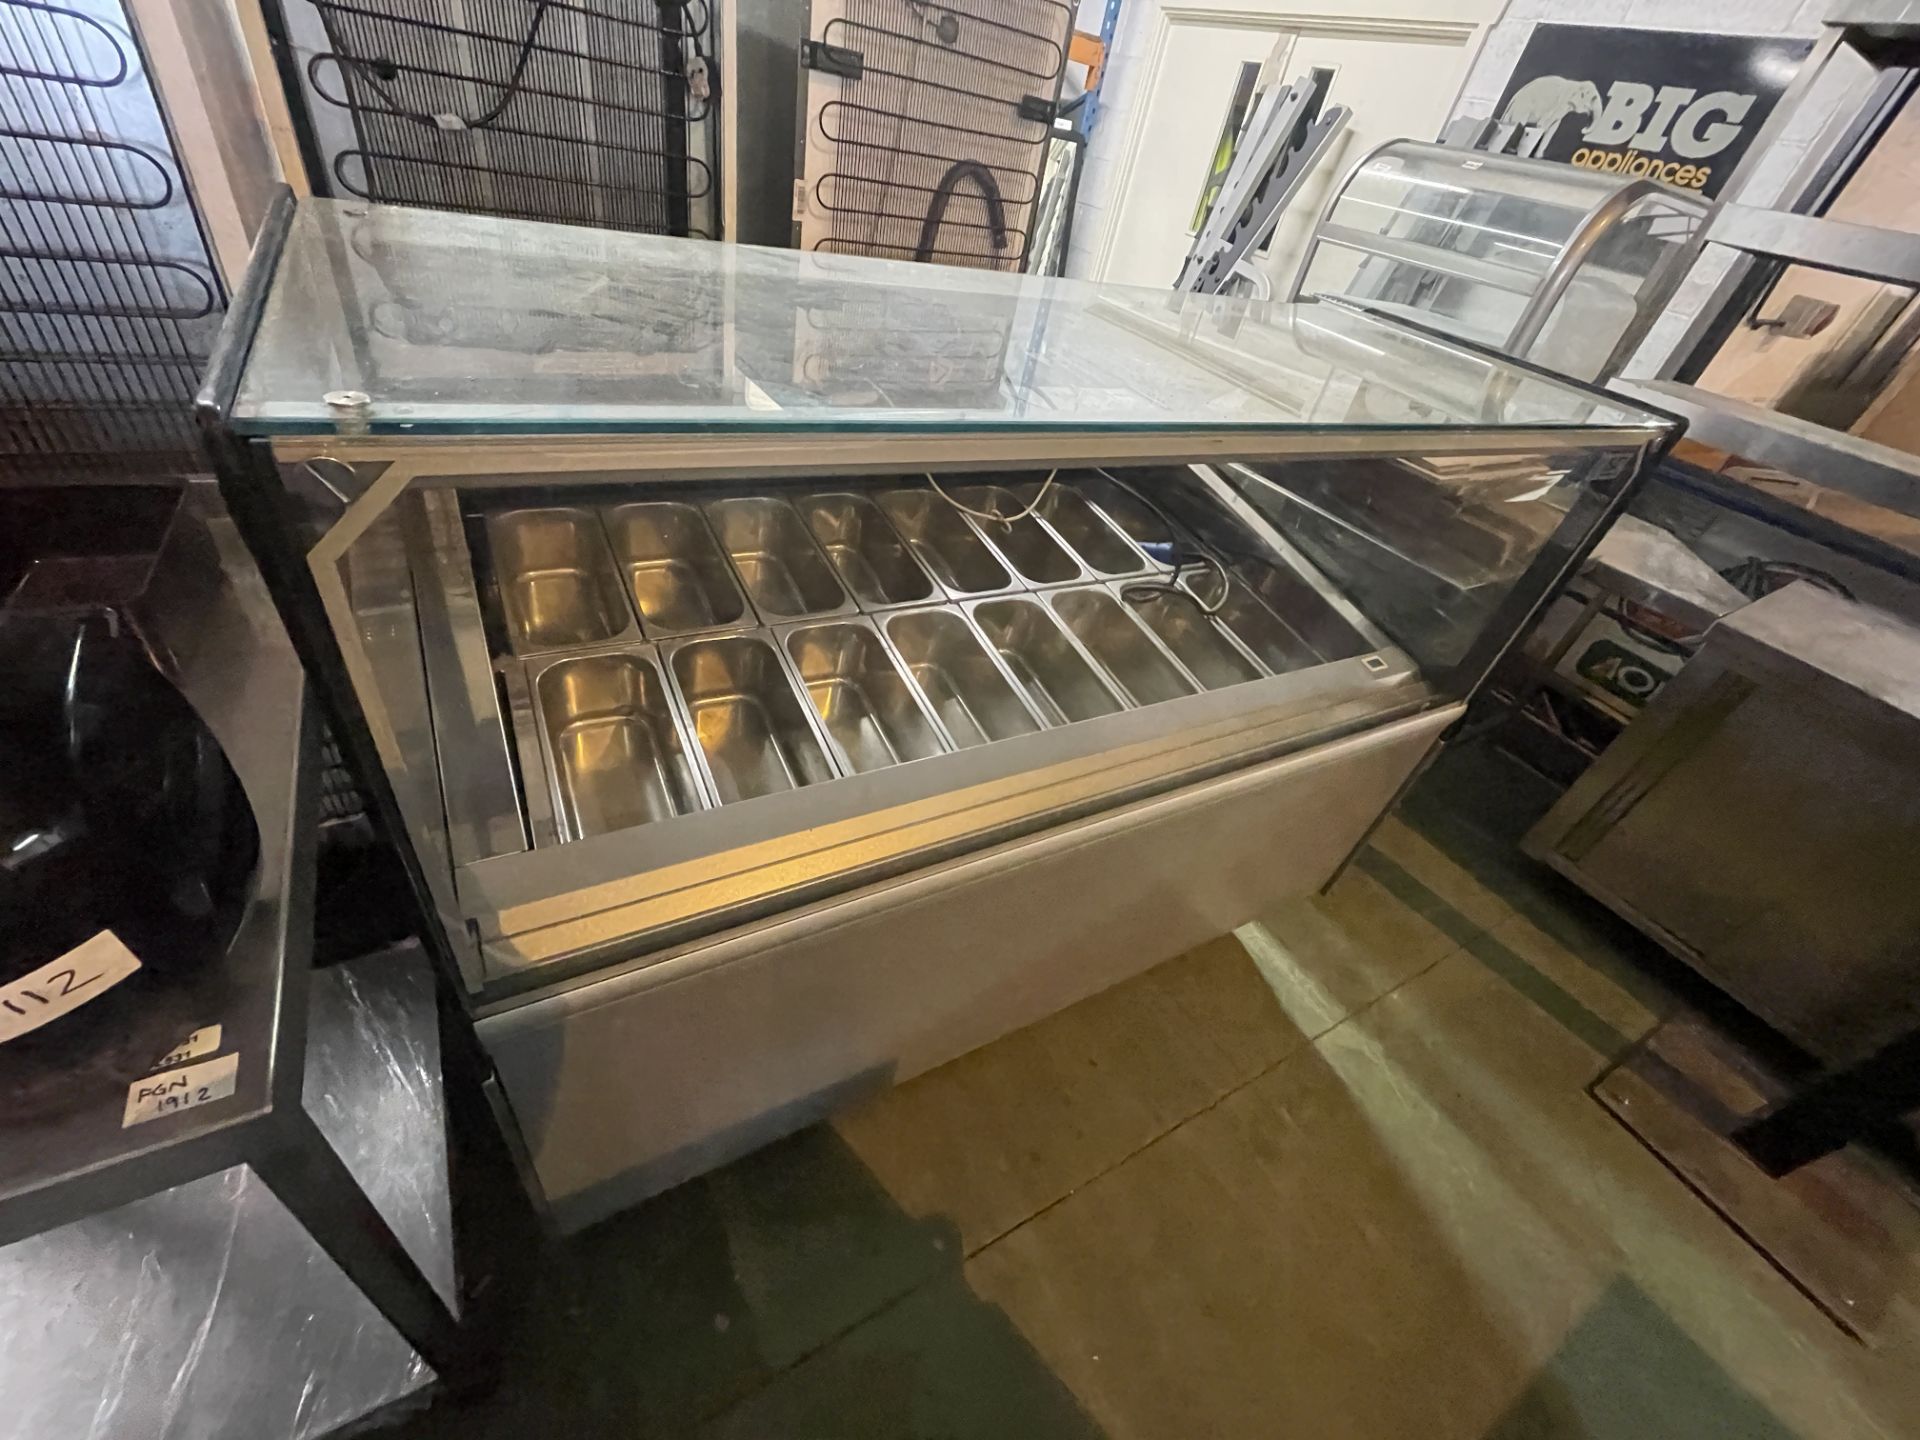 1 x Ice Cream & Gelato Display and Serve Cabinet by ISA - Dimensions: H131 x W150 x D105 cms - Image 7 of 8